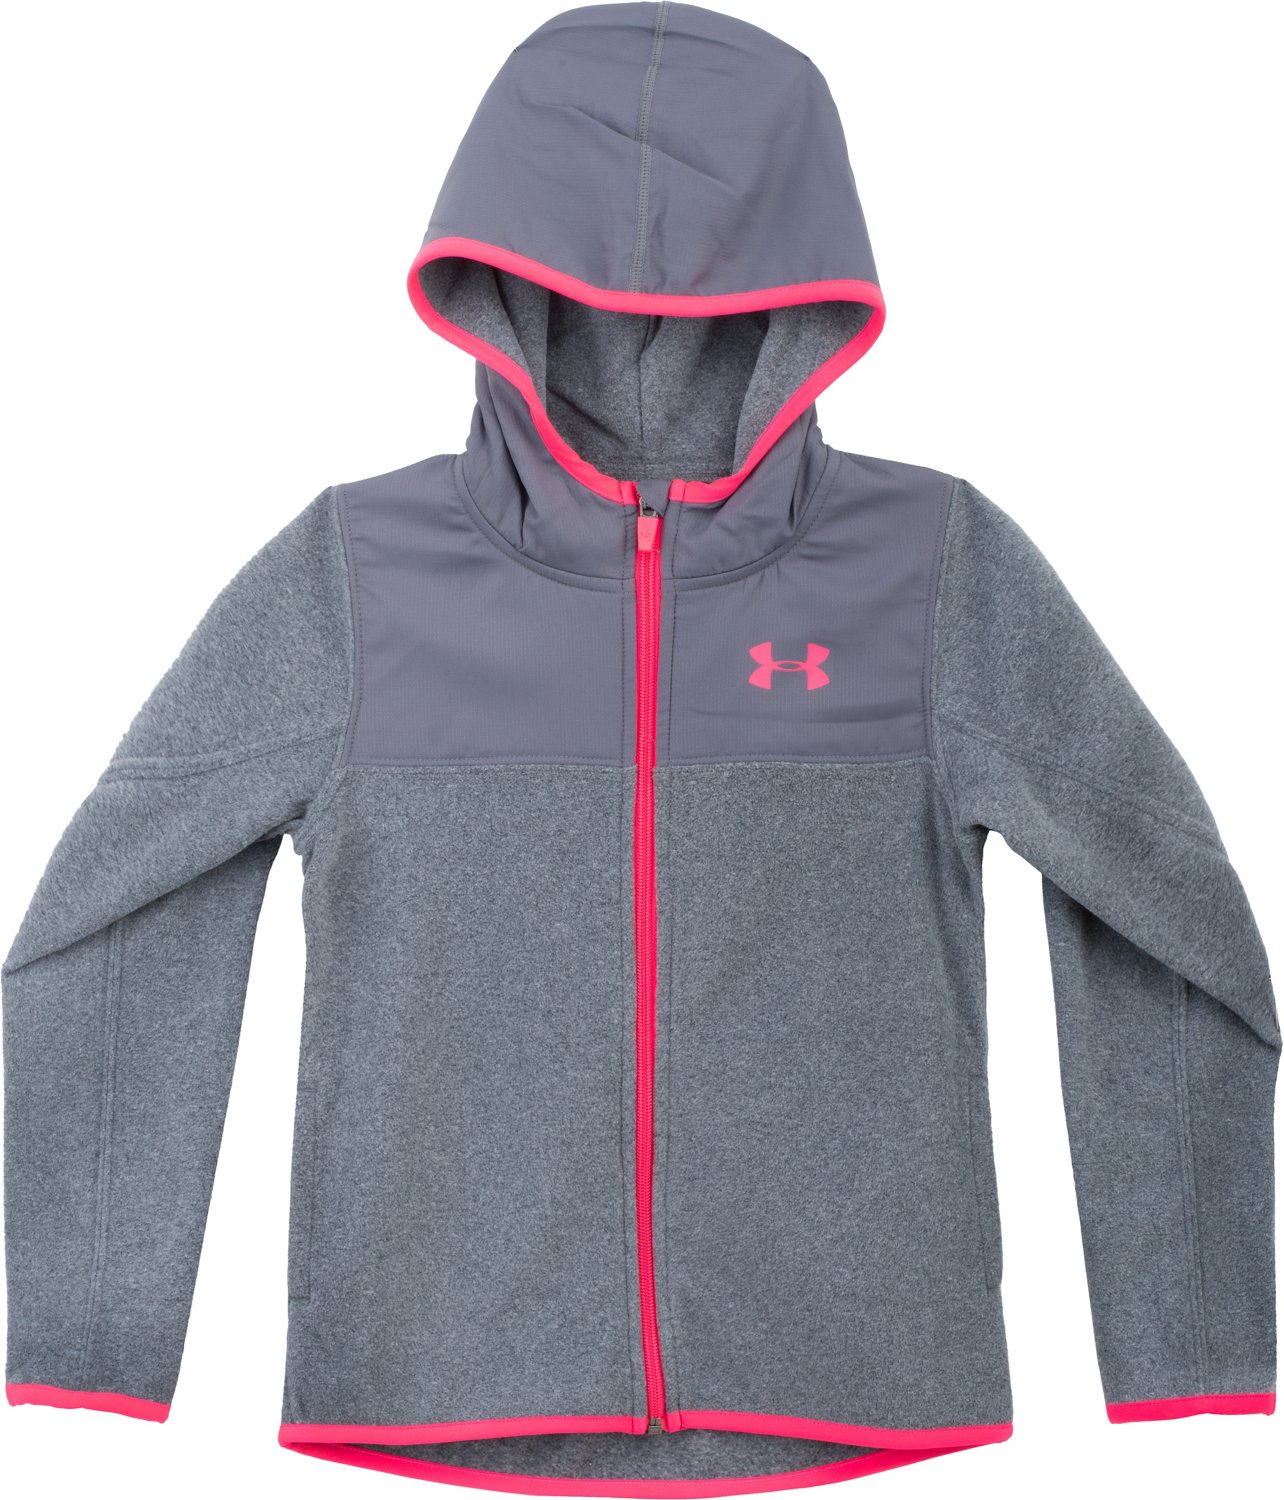 under armor jackets for girls